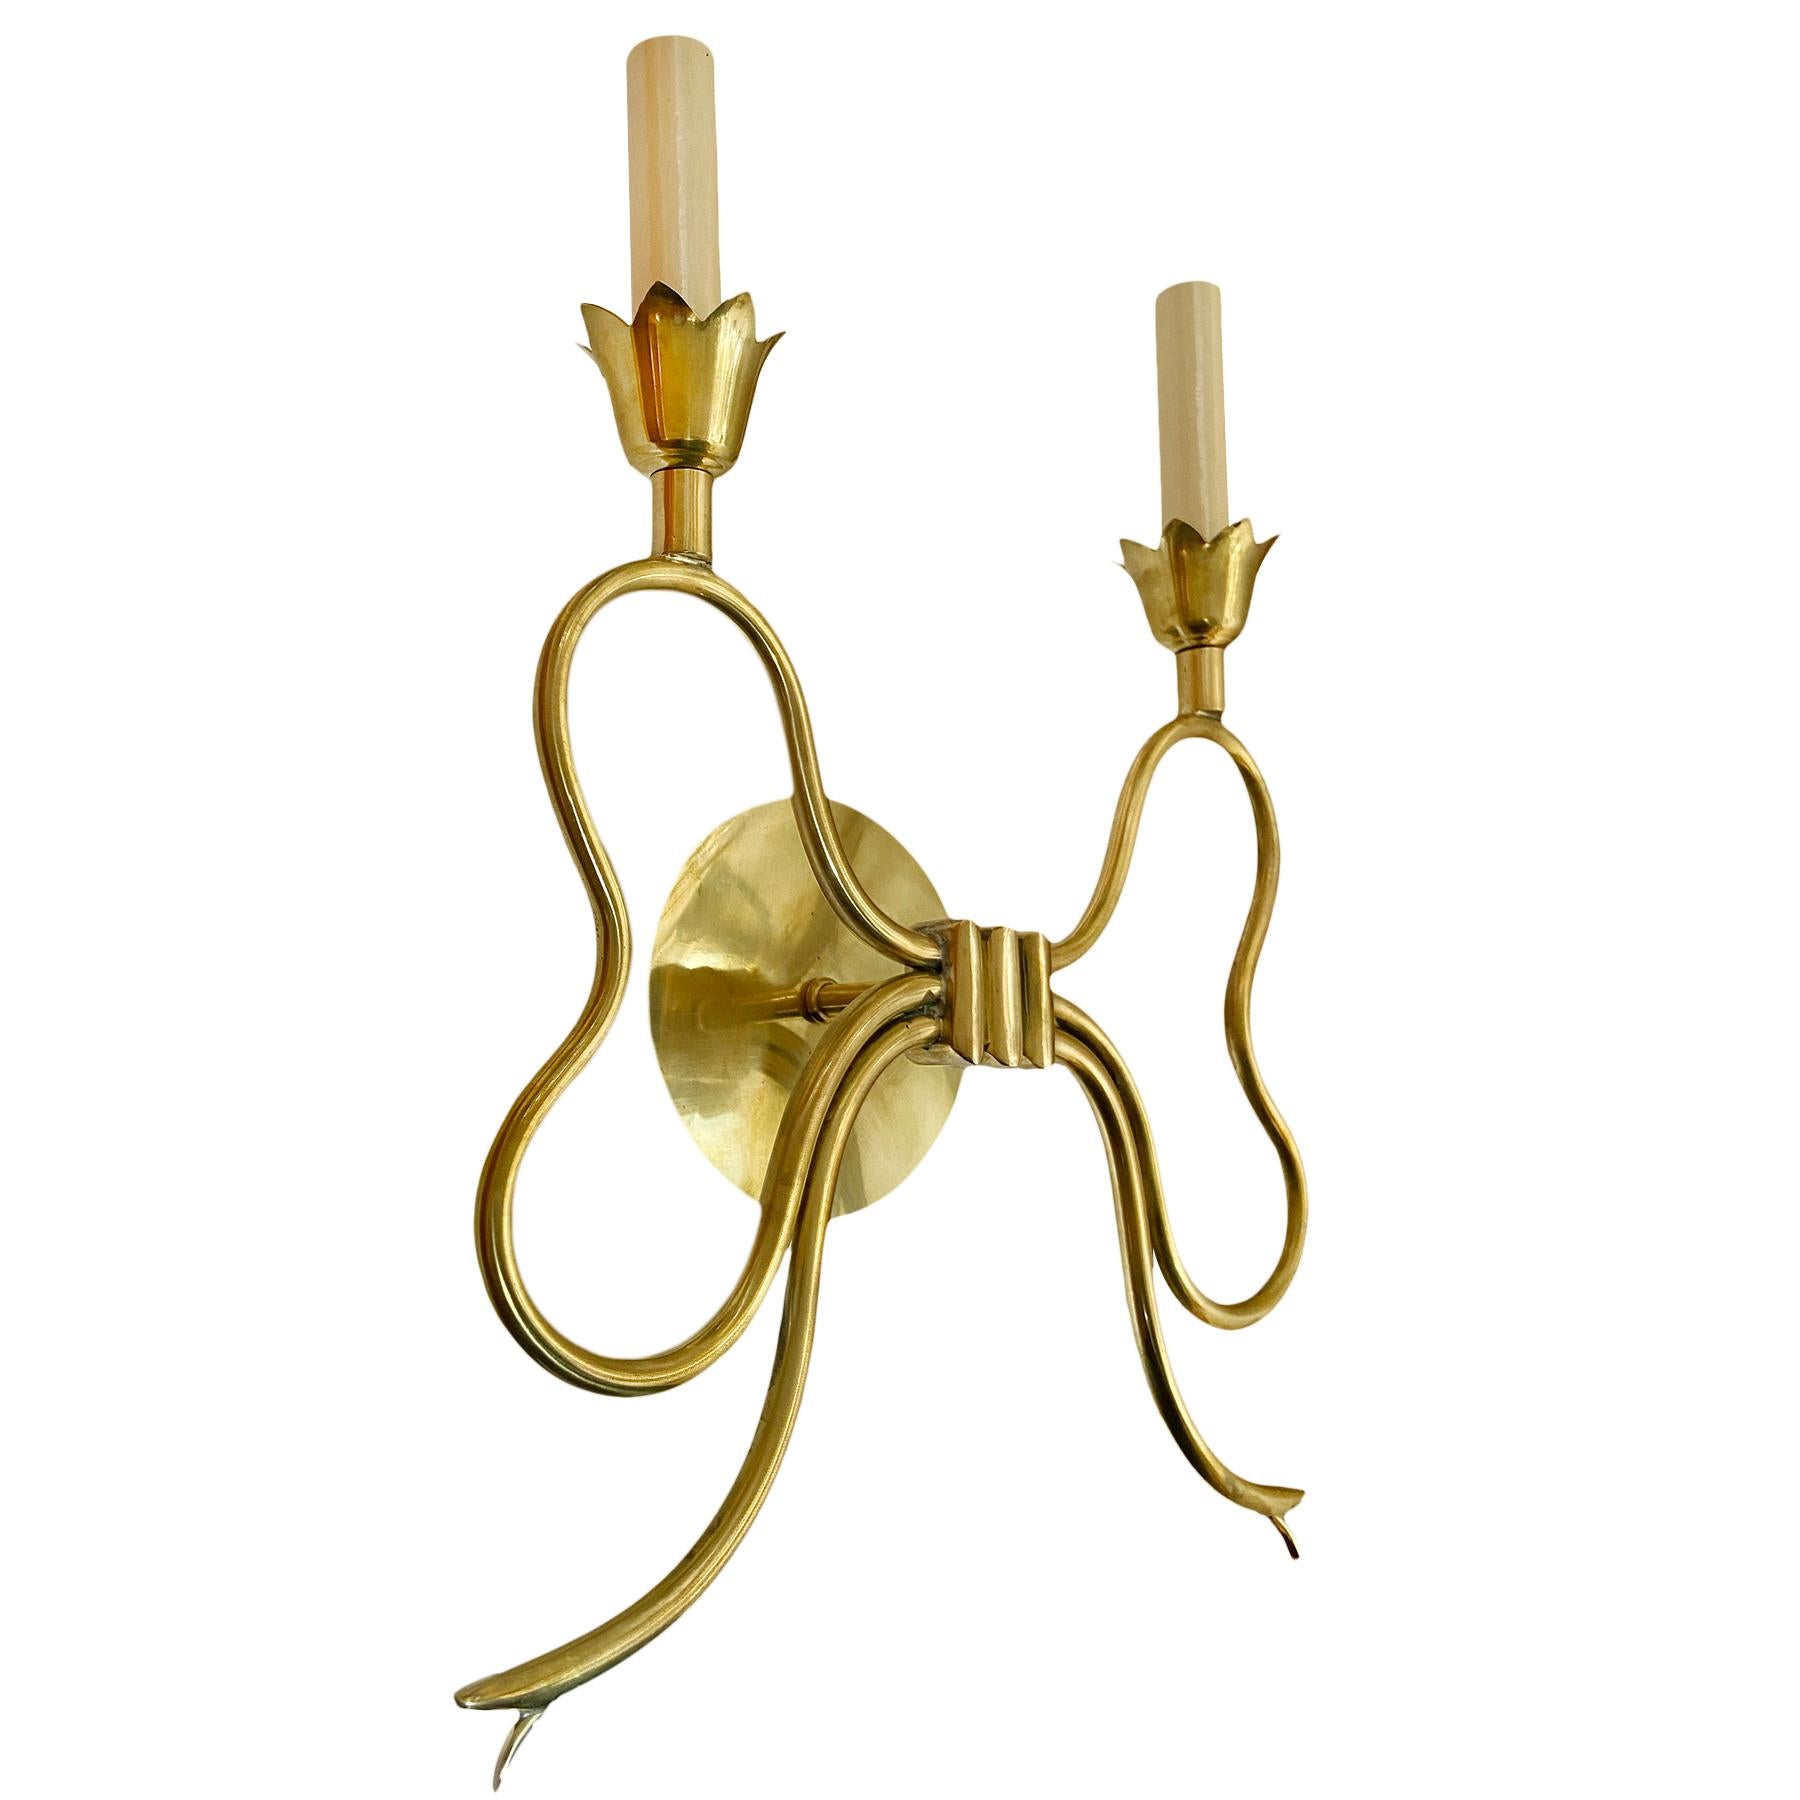 A set of four mid-century French Moderne sconces. Sold in pairs.

Measurements:
Height: 12